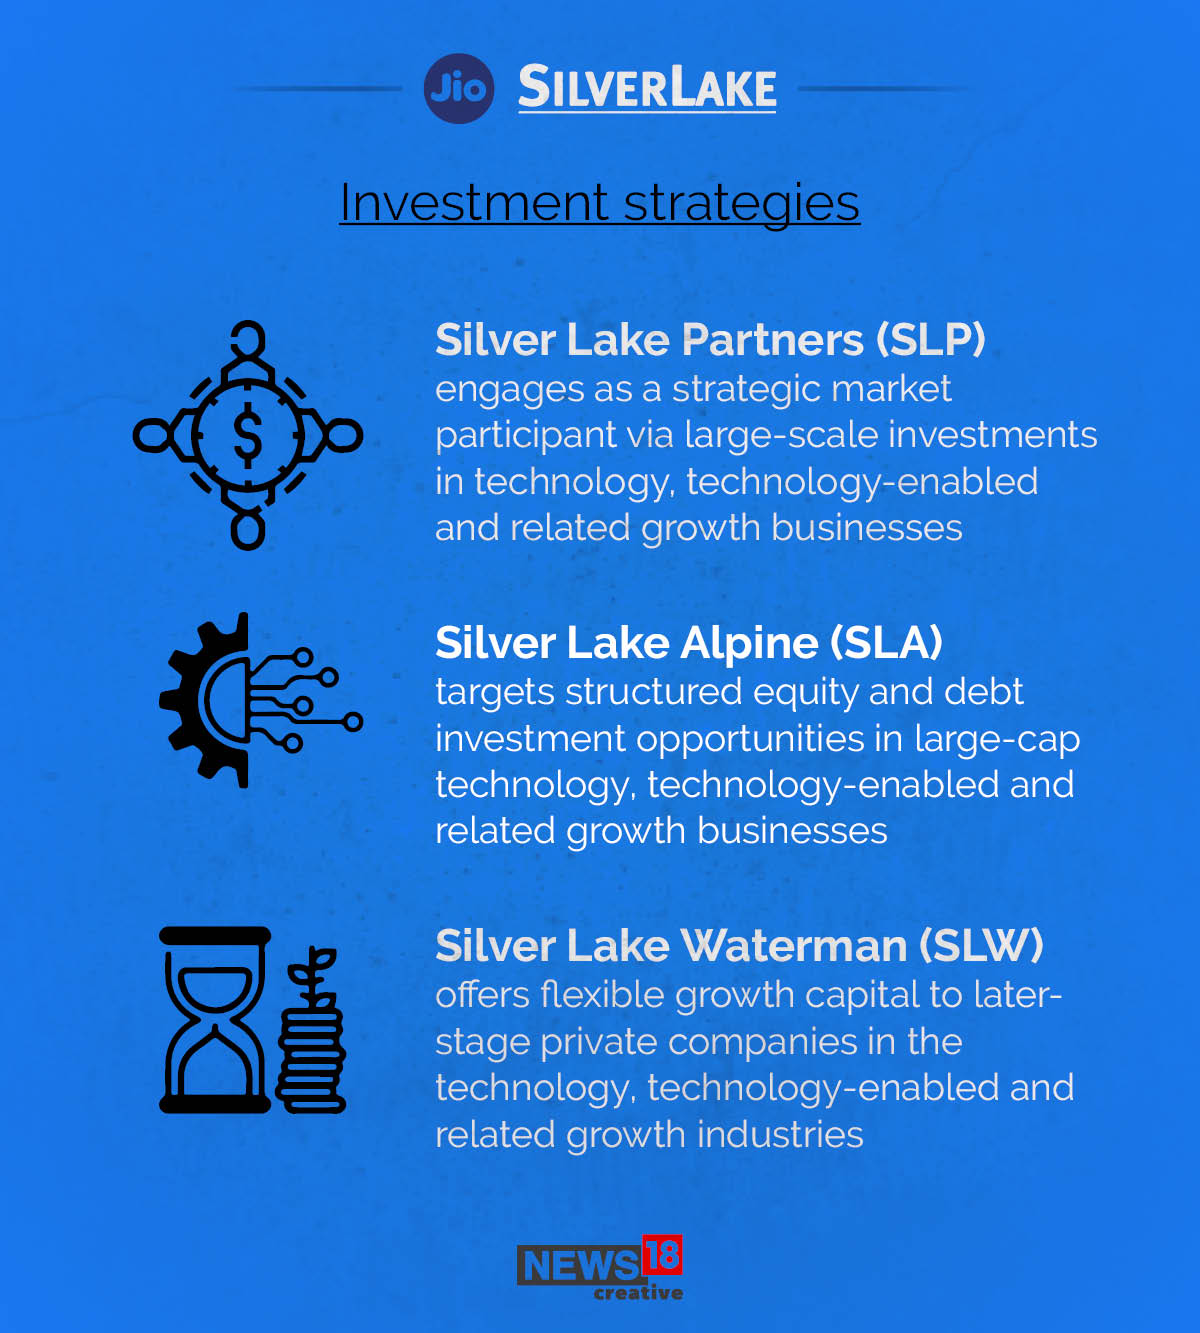 Silver Lake invests another Rs 4,547 crore in Jio Platforms